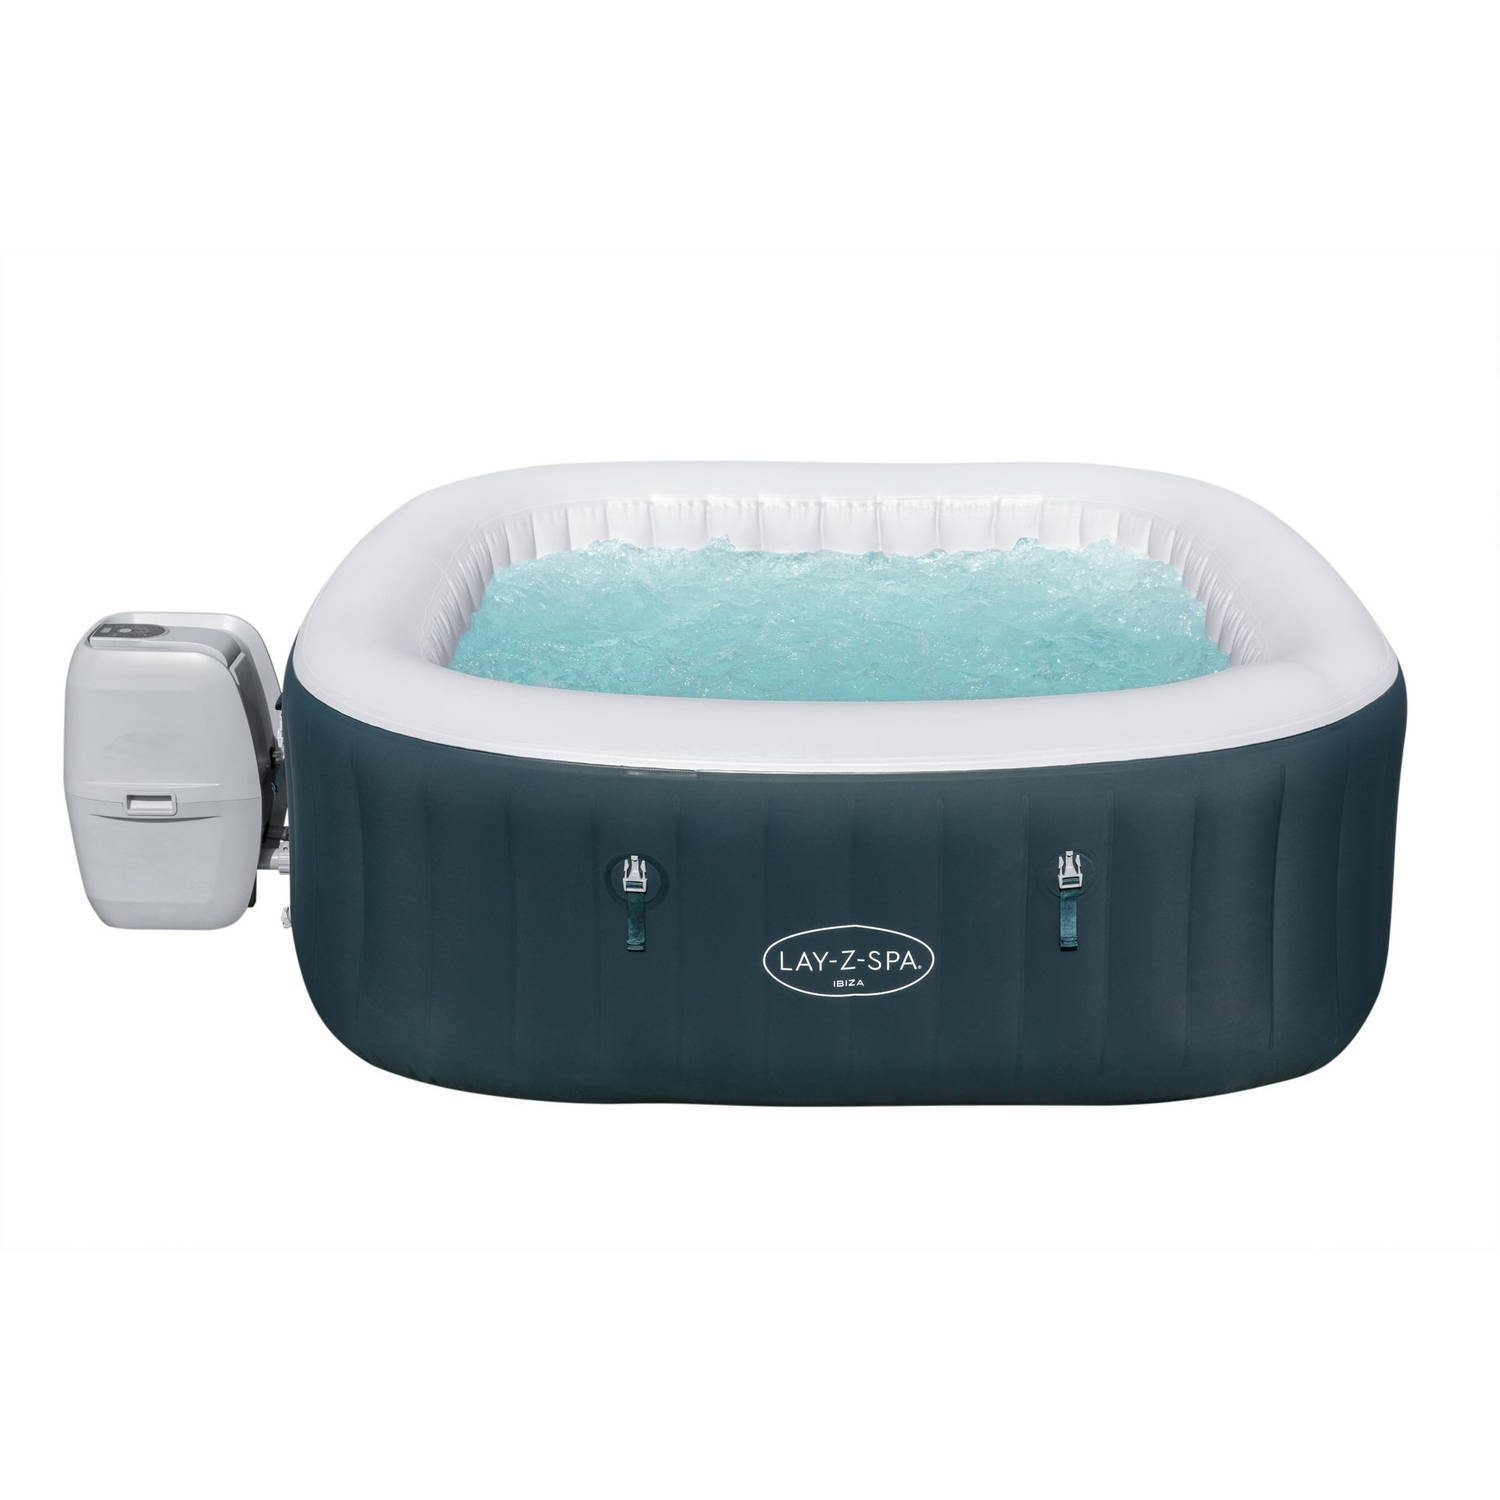 Lay-z-spa Ibiza Max 6 Pers 140 Airjets 180x180cm Jacuzzi Bubbelbad- Whirlpool Copy Copy